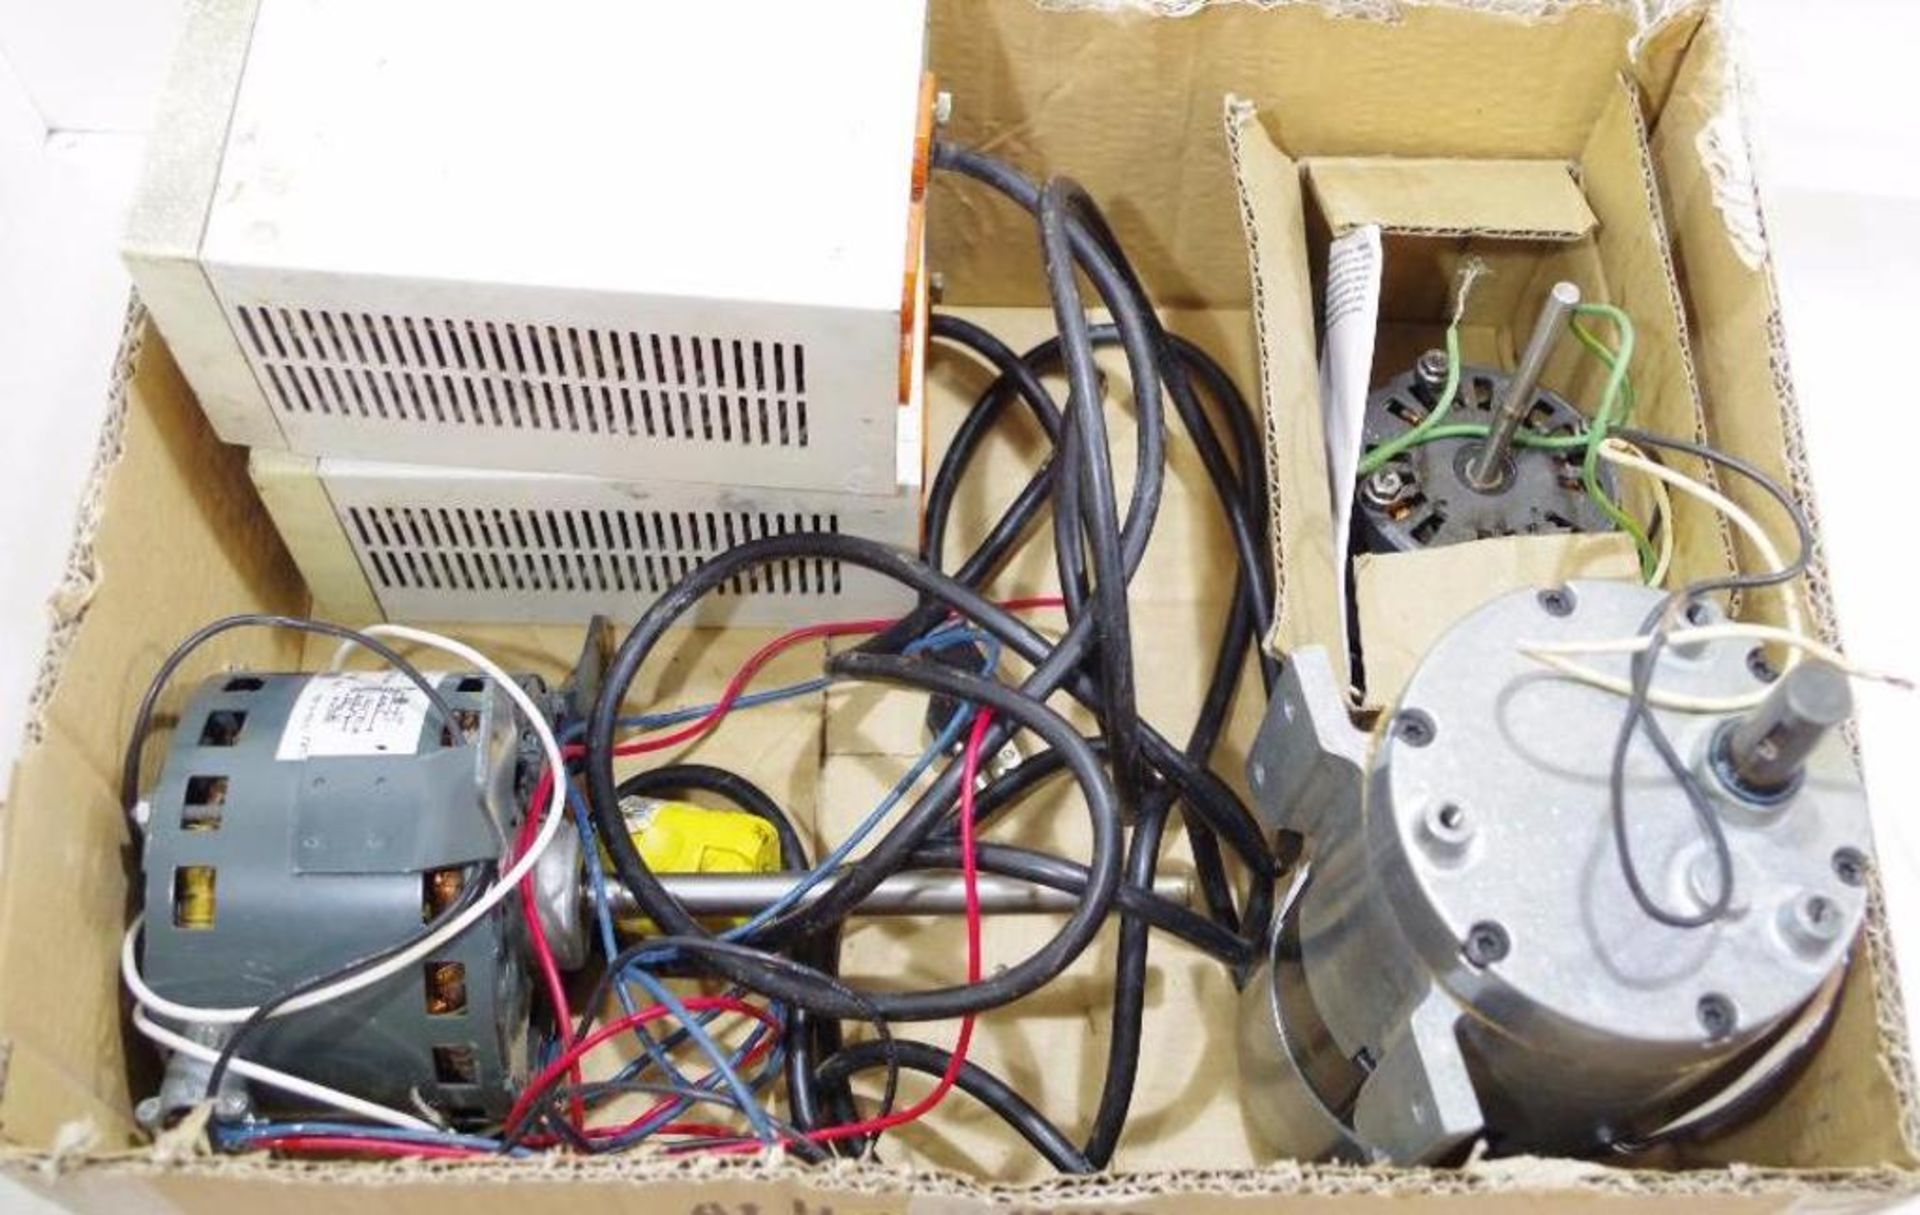 [3] Electrical Motors (Condition Unknown) & [2] POWERVAR Ground Guards (Condition Unknown)